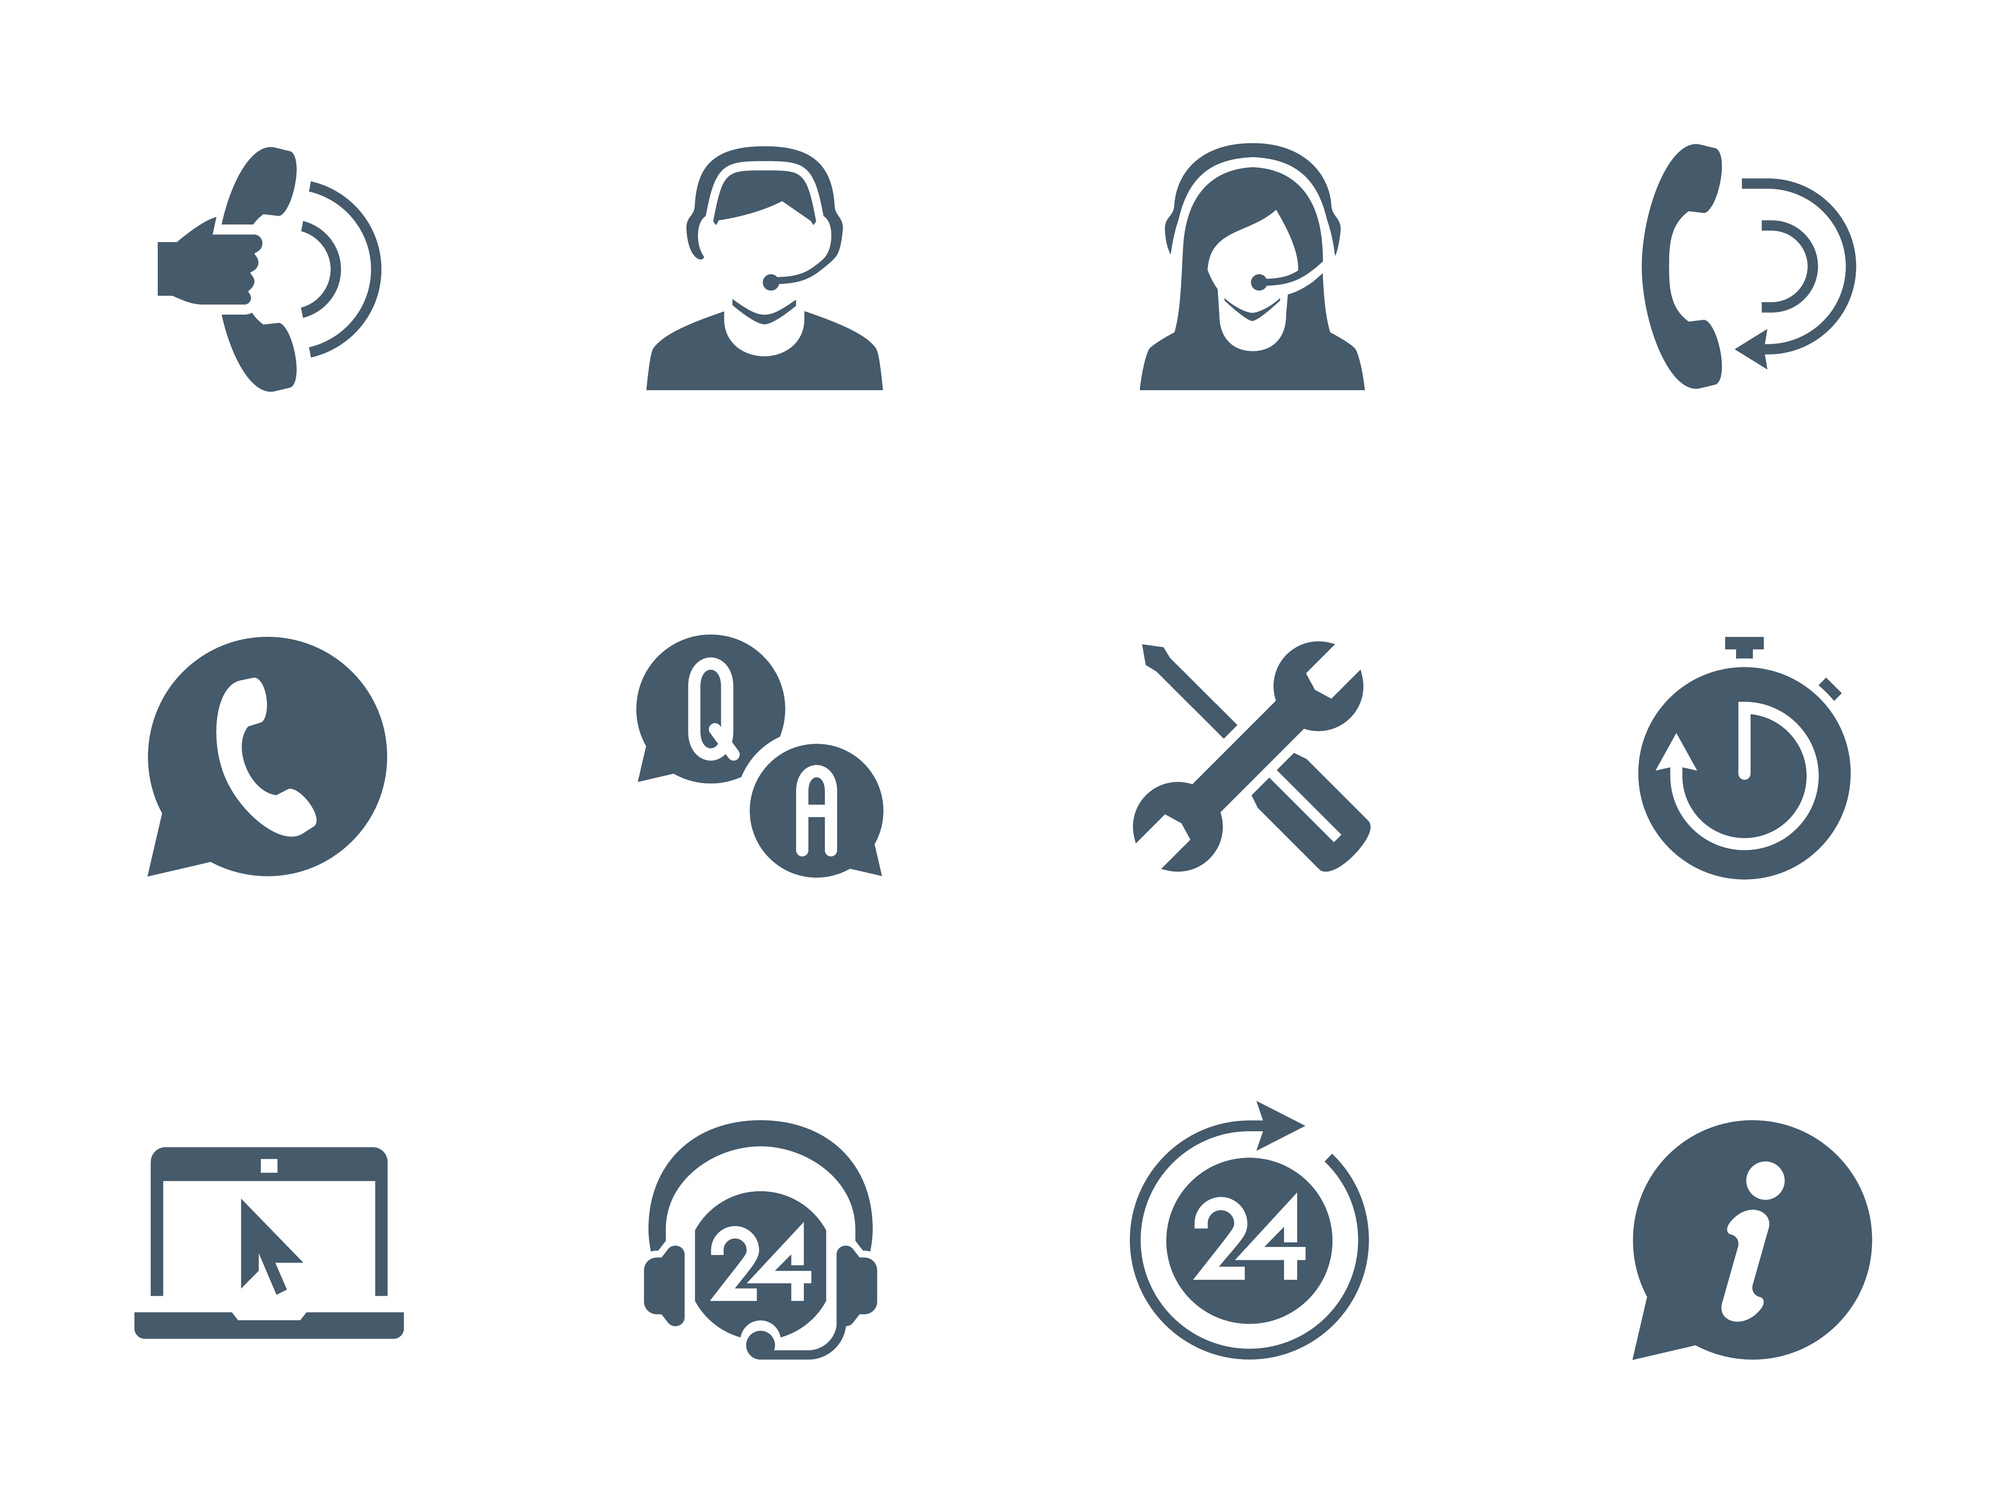 Service icons for industries benefiting from answering services